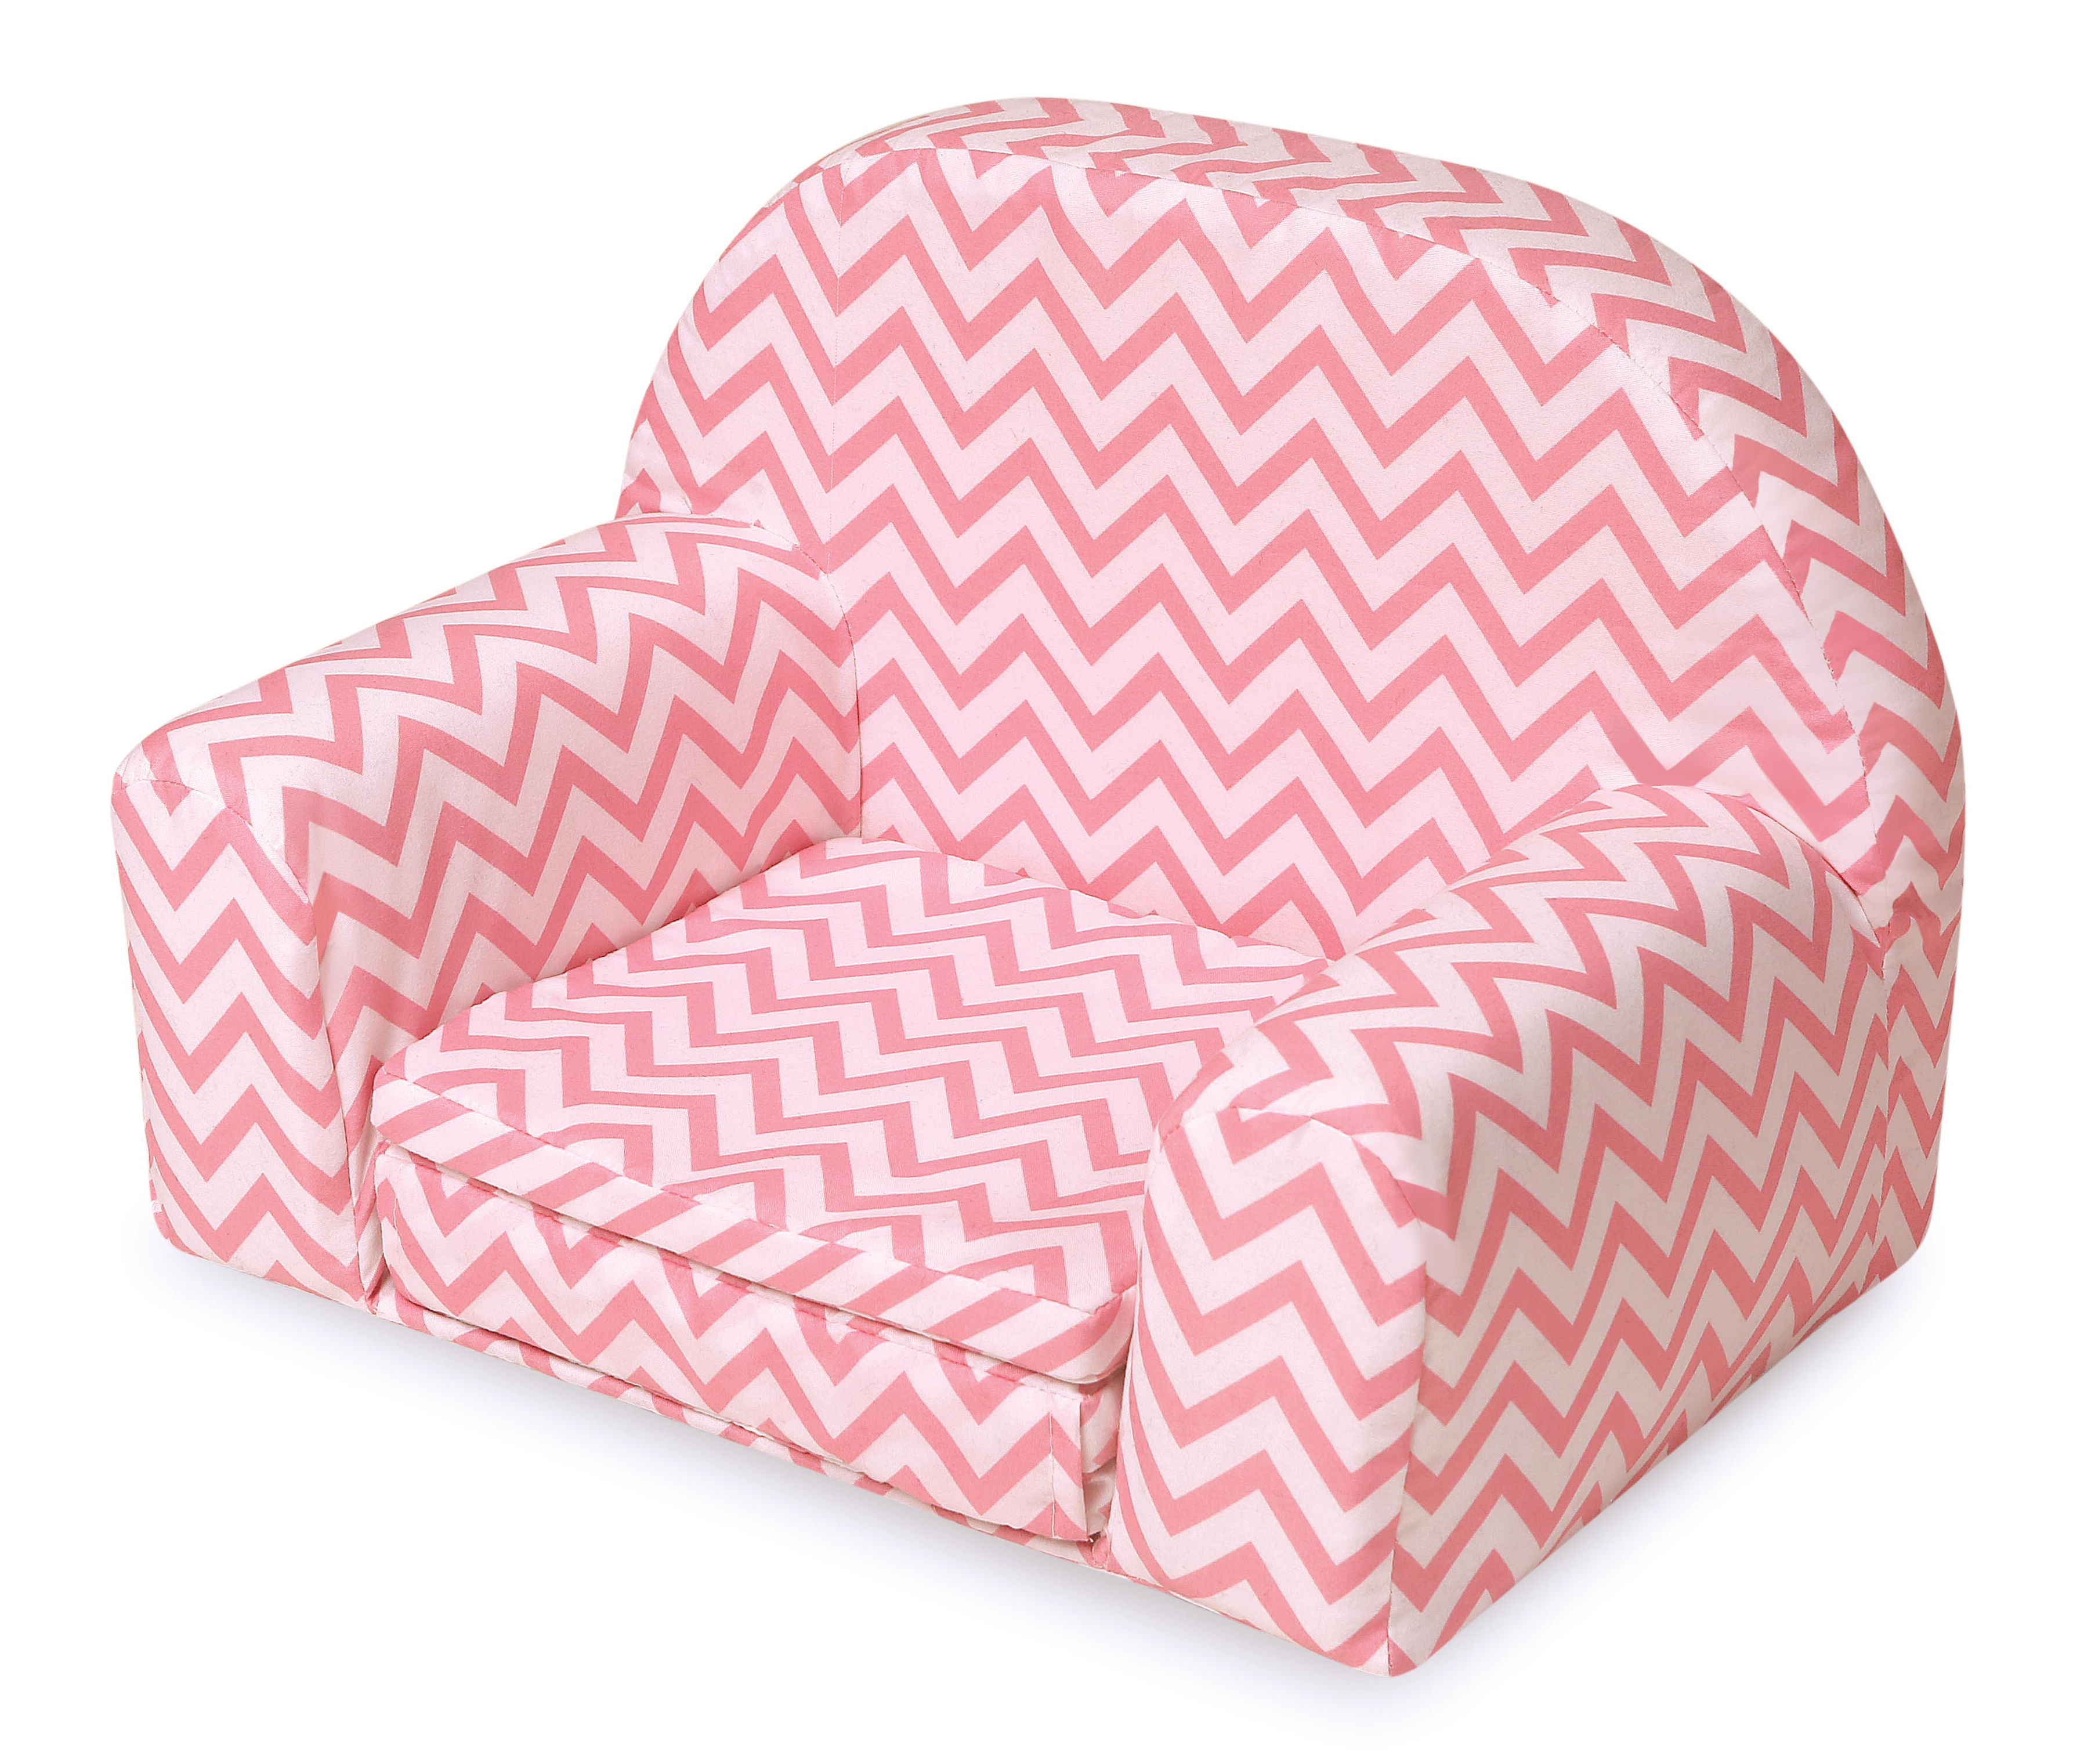 Upholstered Doll Chair with Foldout Bed - Pink Chevron